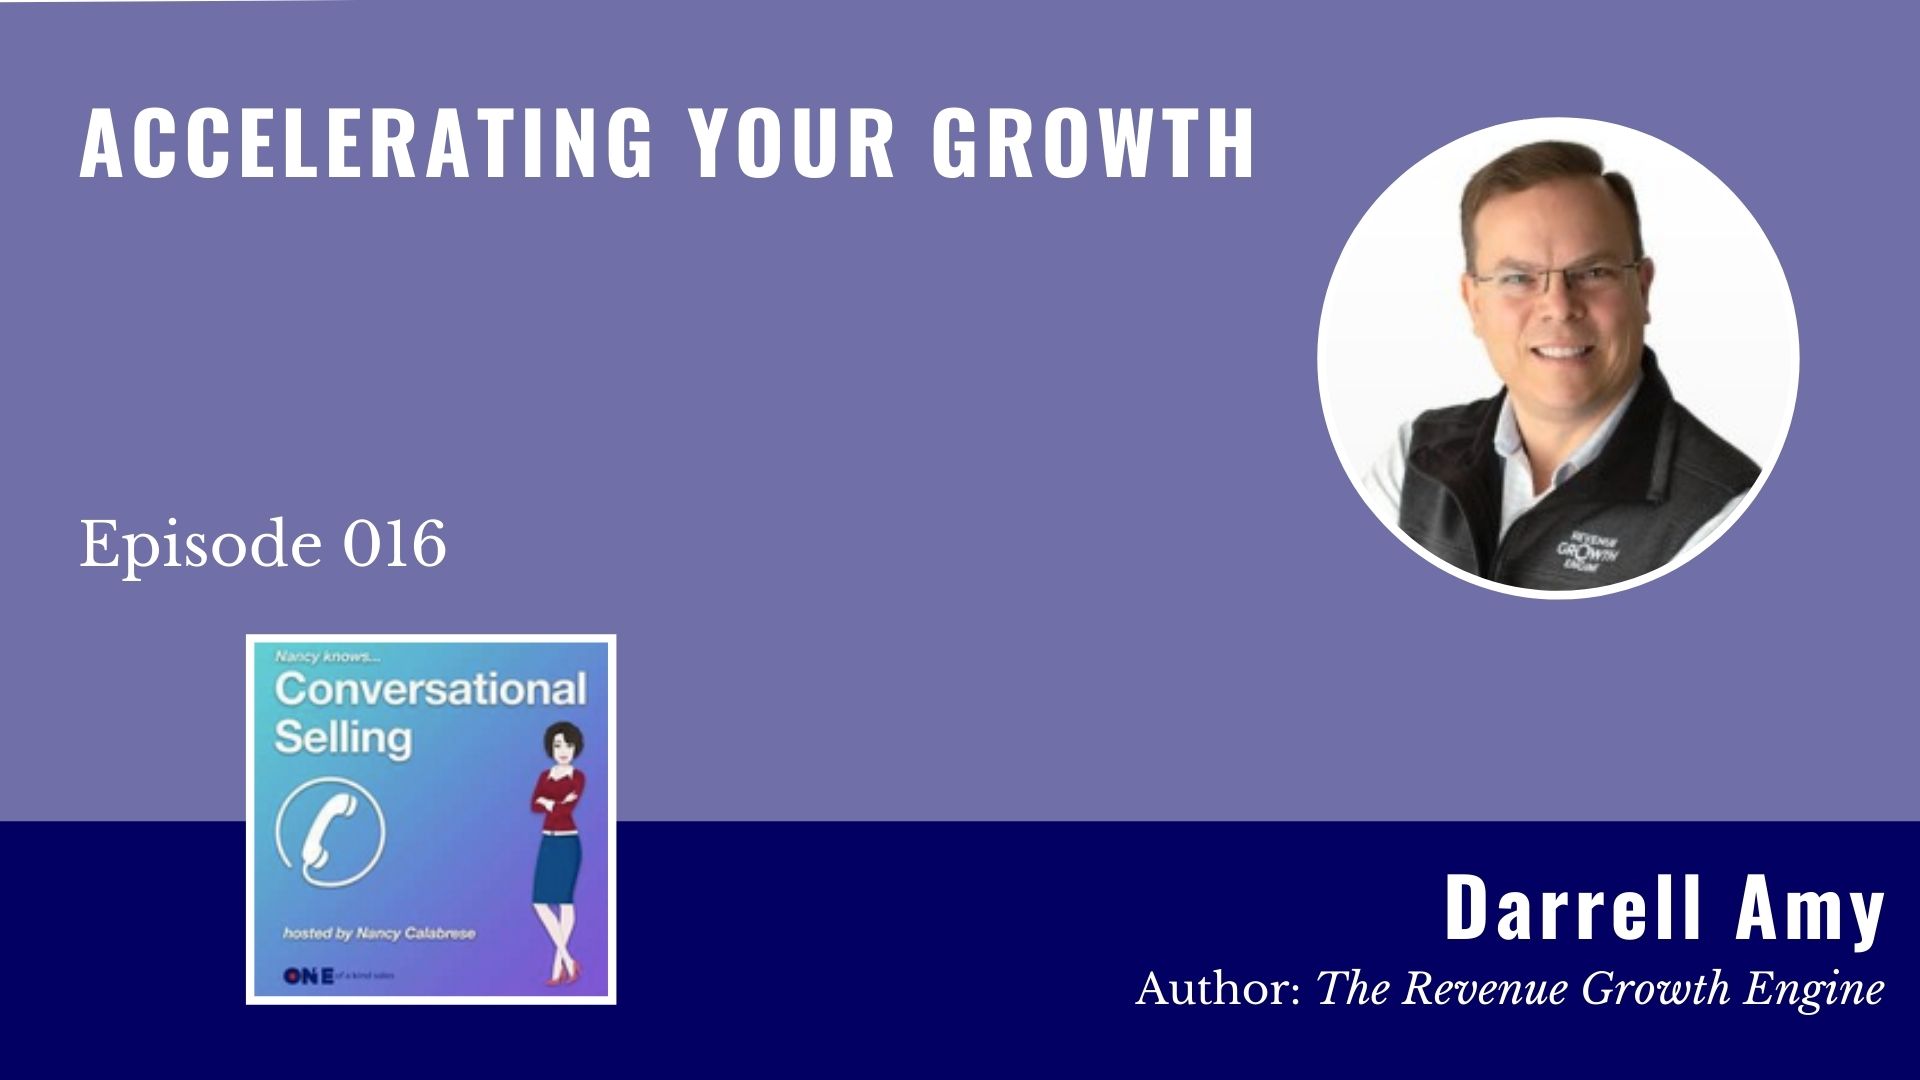 Darrell Amy | Accelerating Your Growth